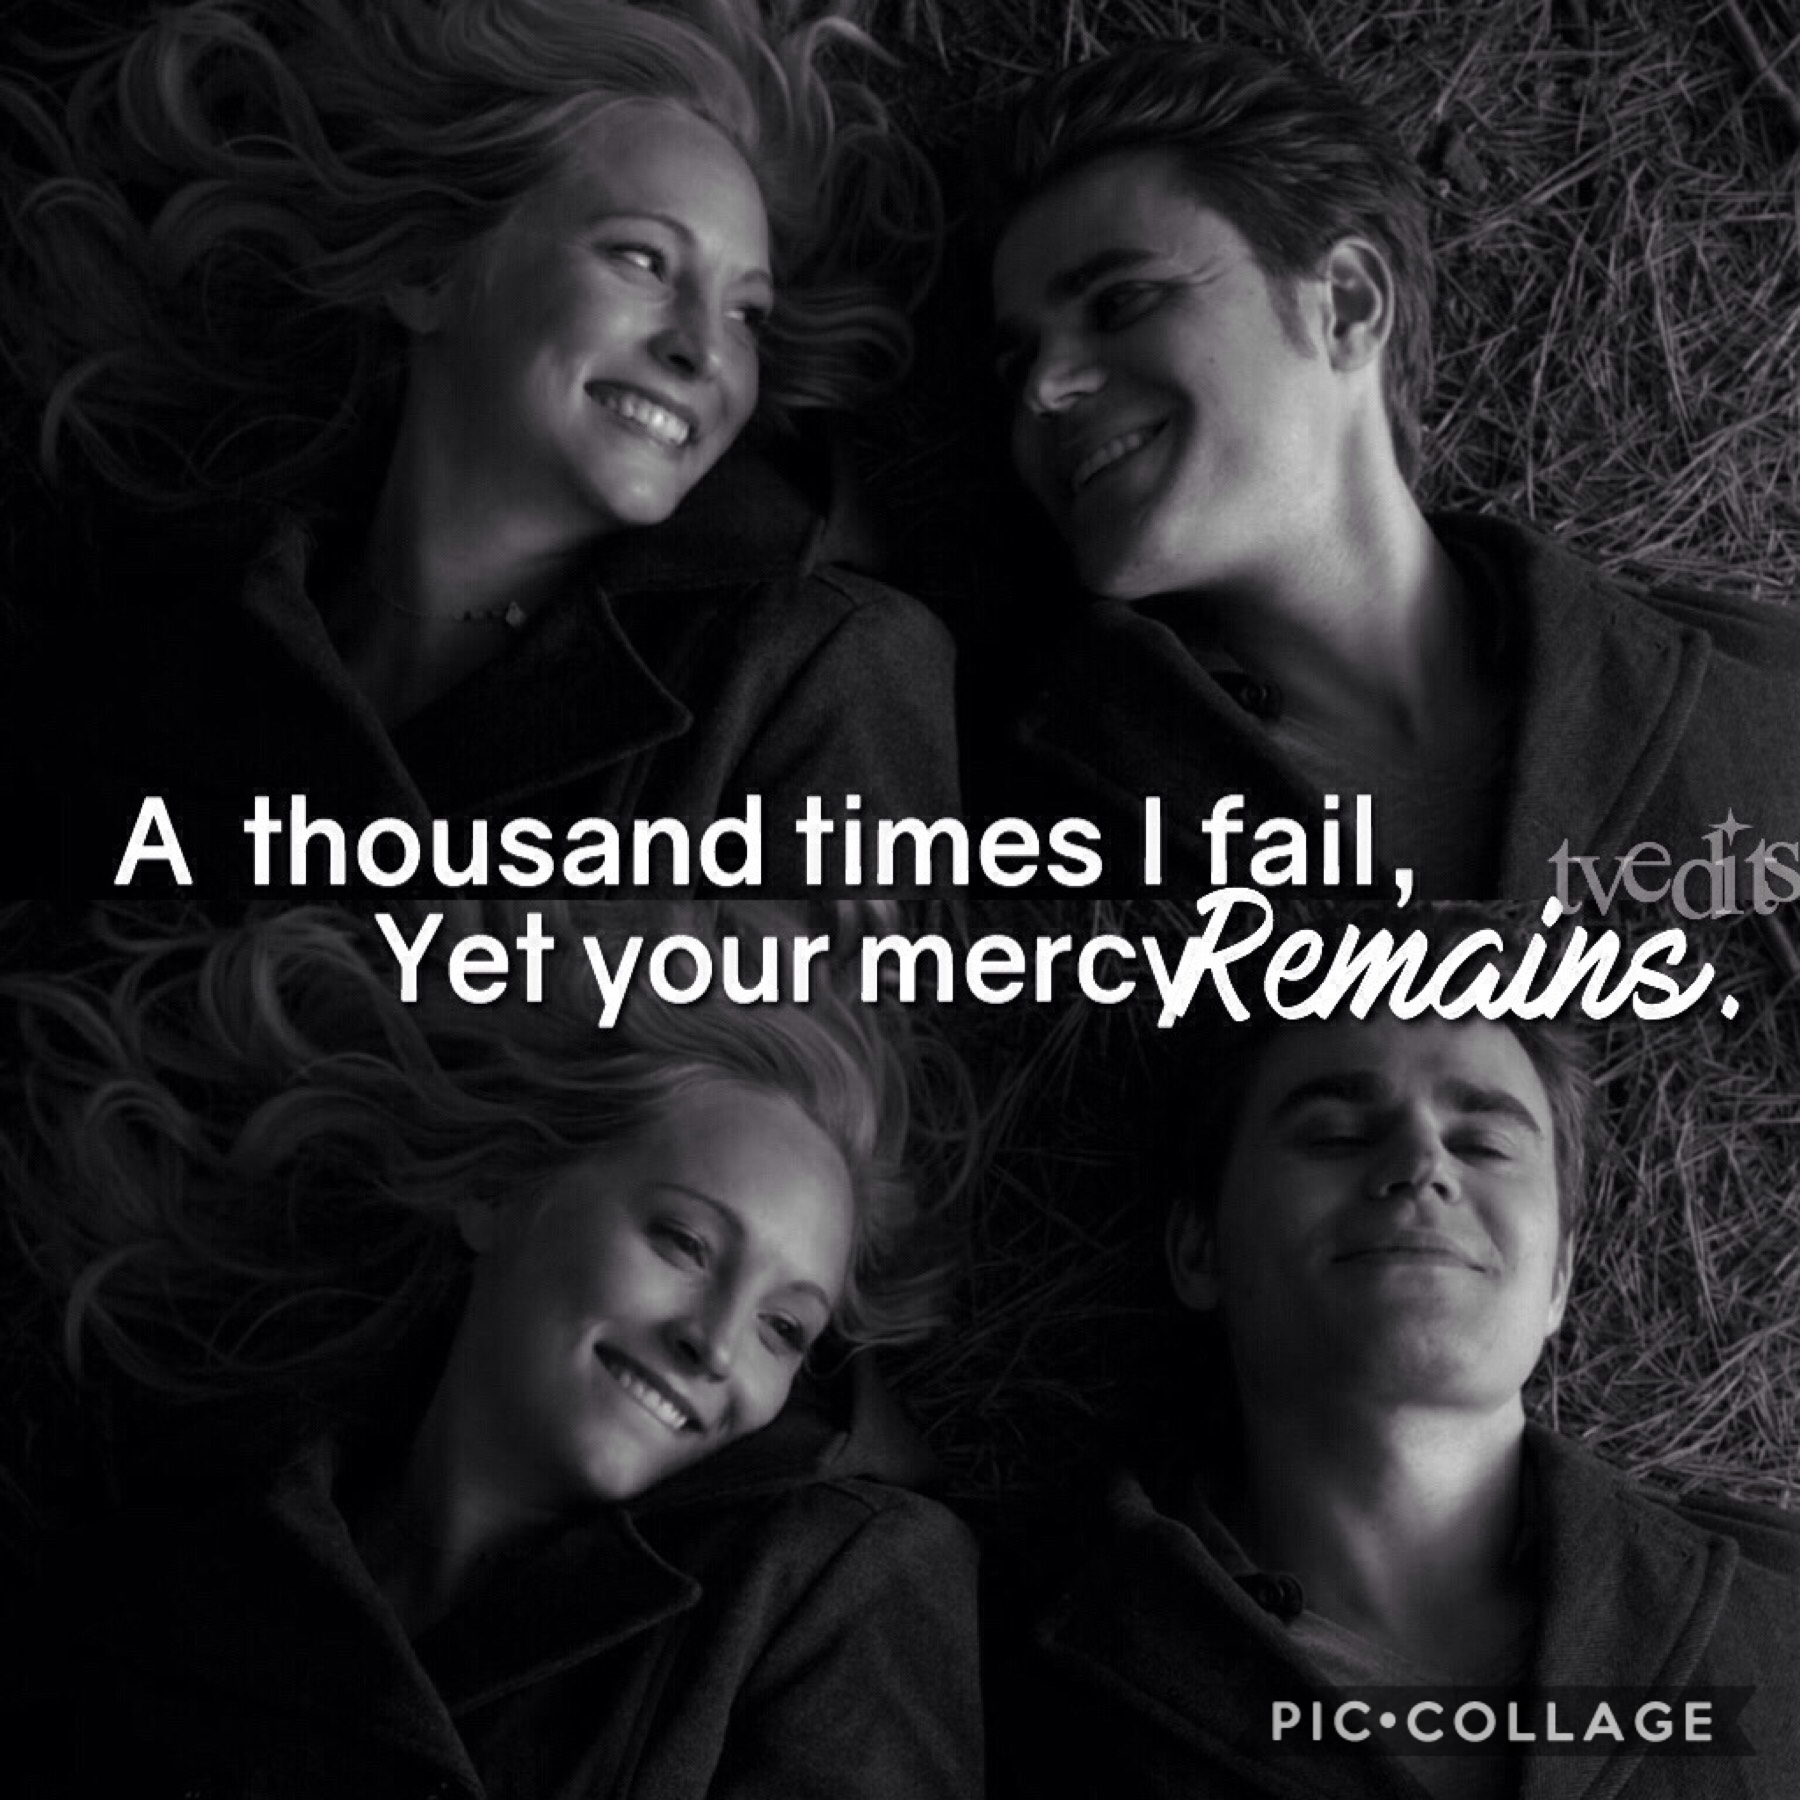 Tap me

I know, I know. Again with Steroline. But like seriously. My ALL TIME favorite otp/ship. I'm gonna try other ships from TVD but like, it's gonna be hard😂maybe I'll do Delena next💁🏼anyways QOTD: favorite colour?